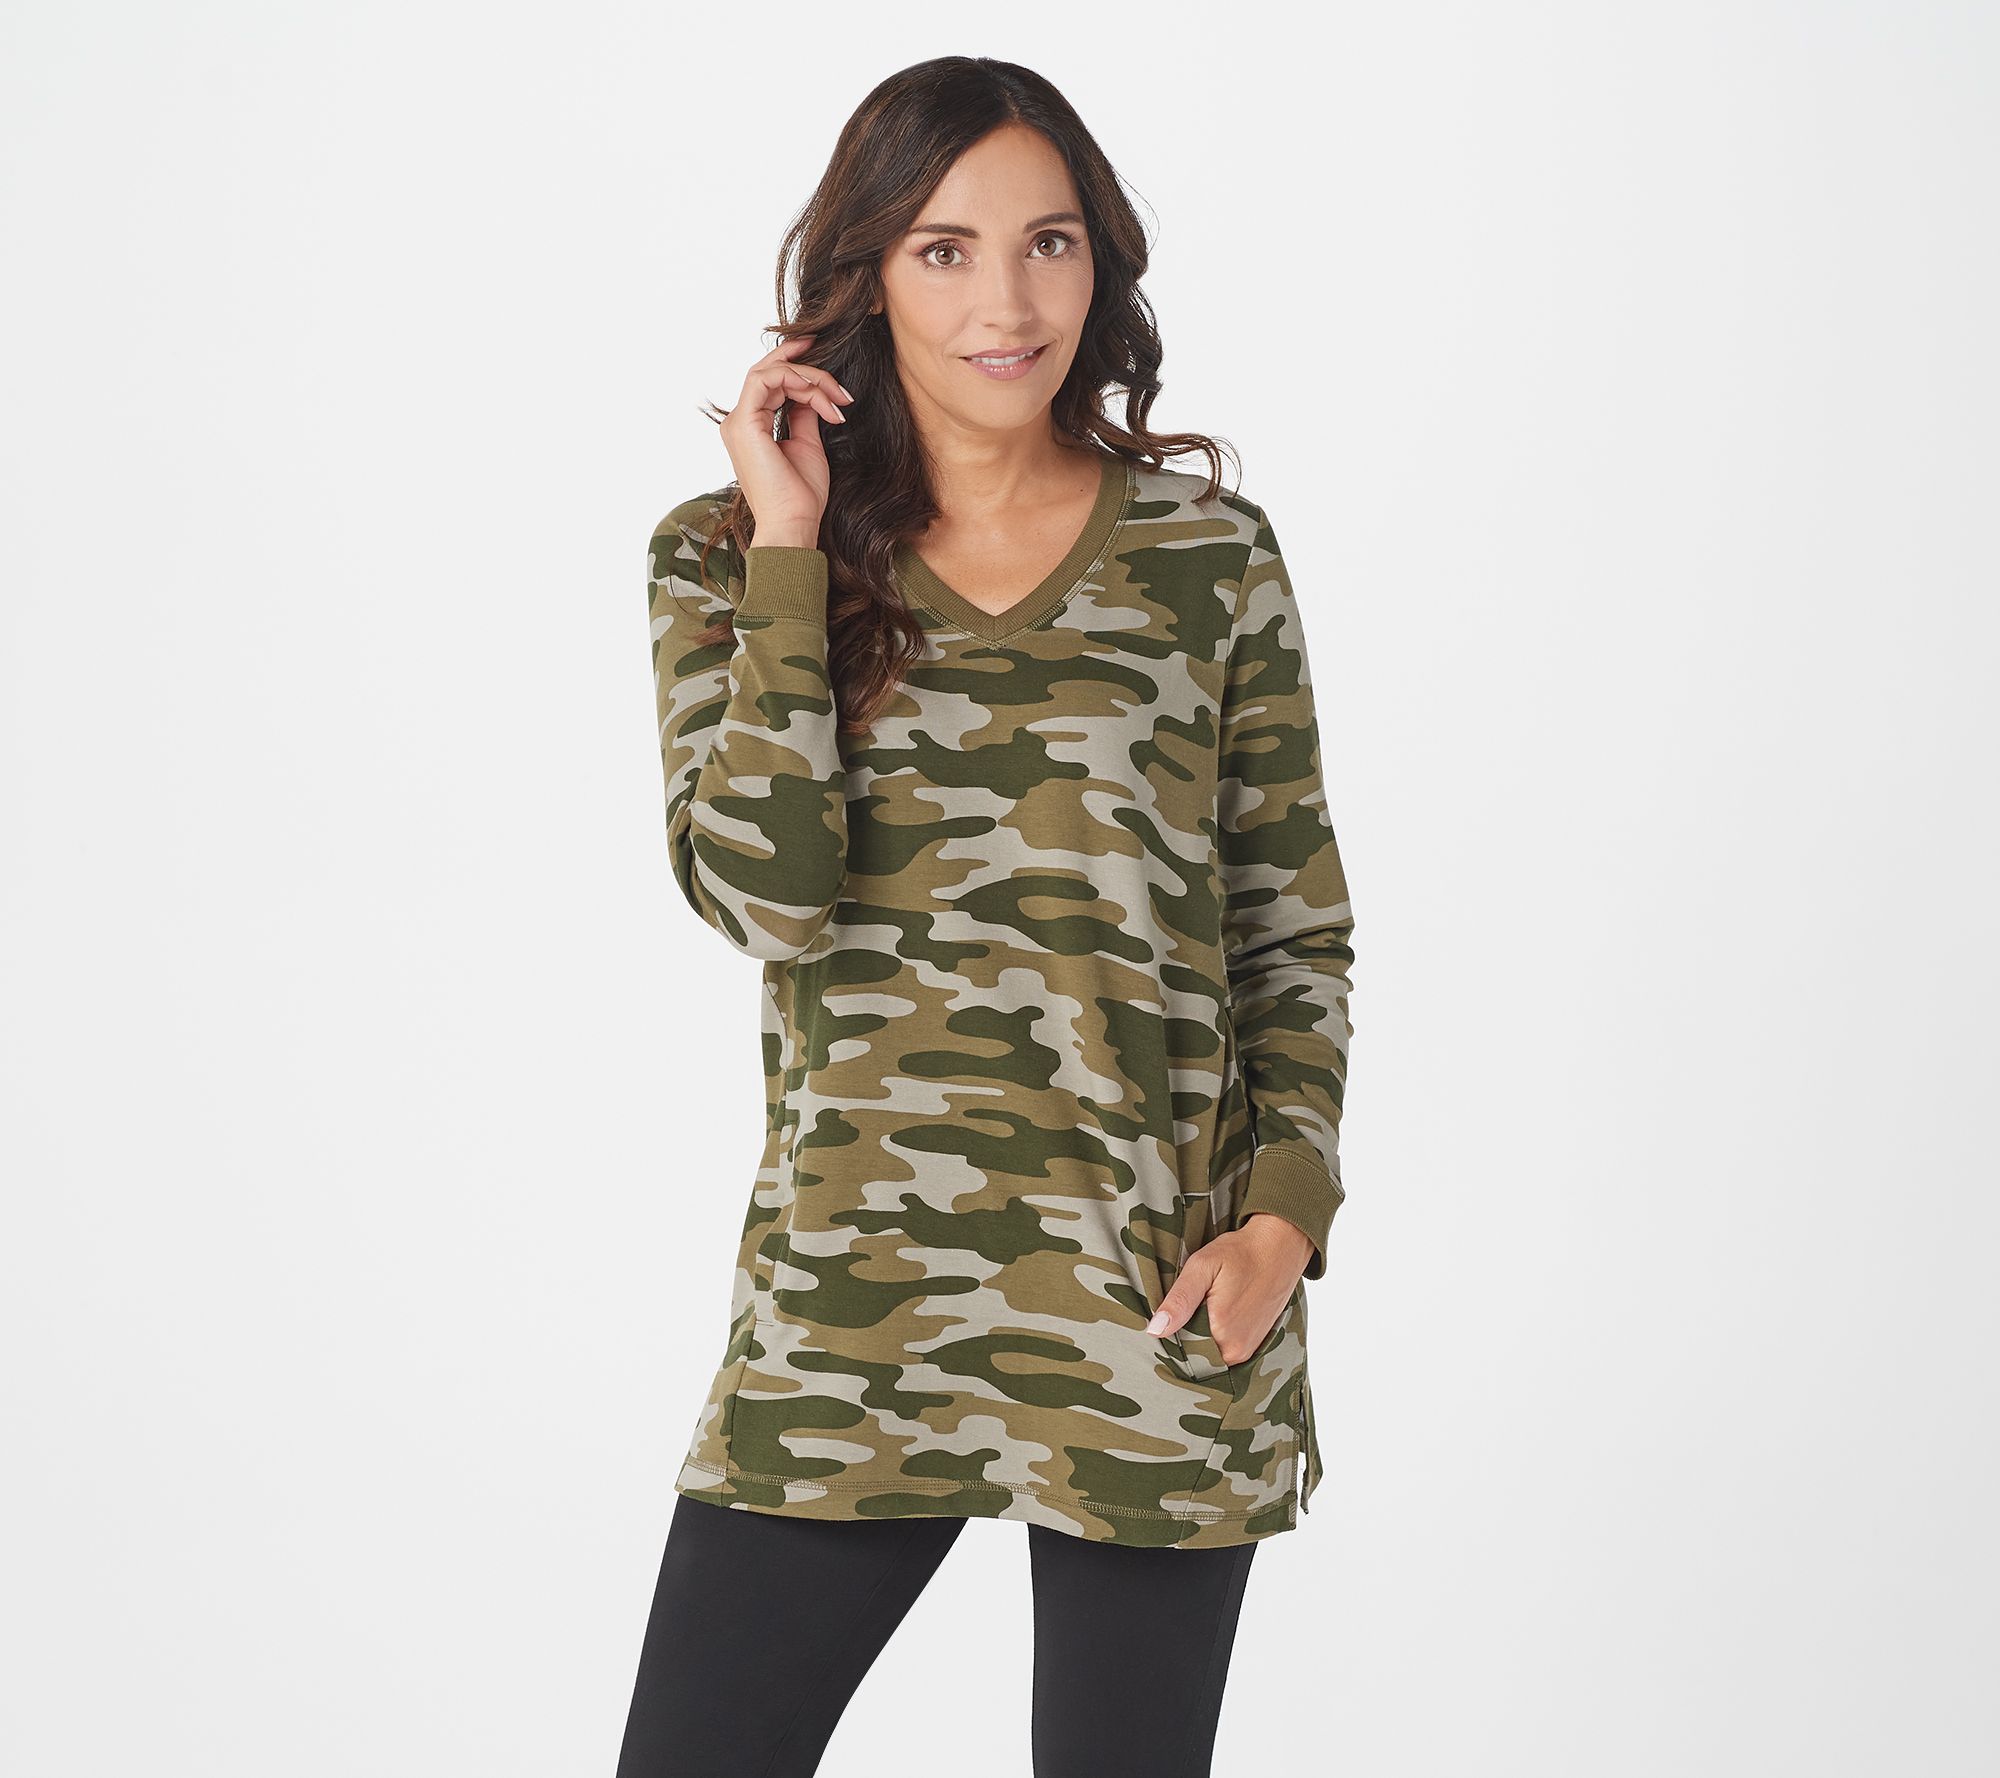 Denim & Co. Active Camo Printed French Terry Tunic Pockets - QVC.com